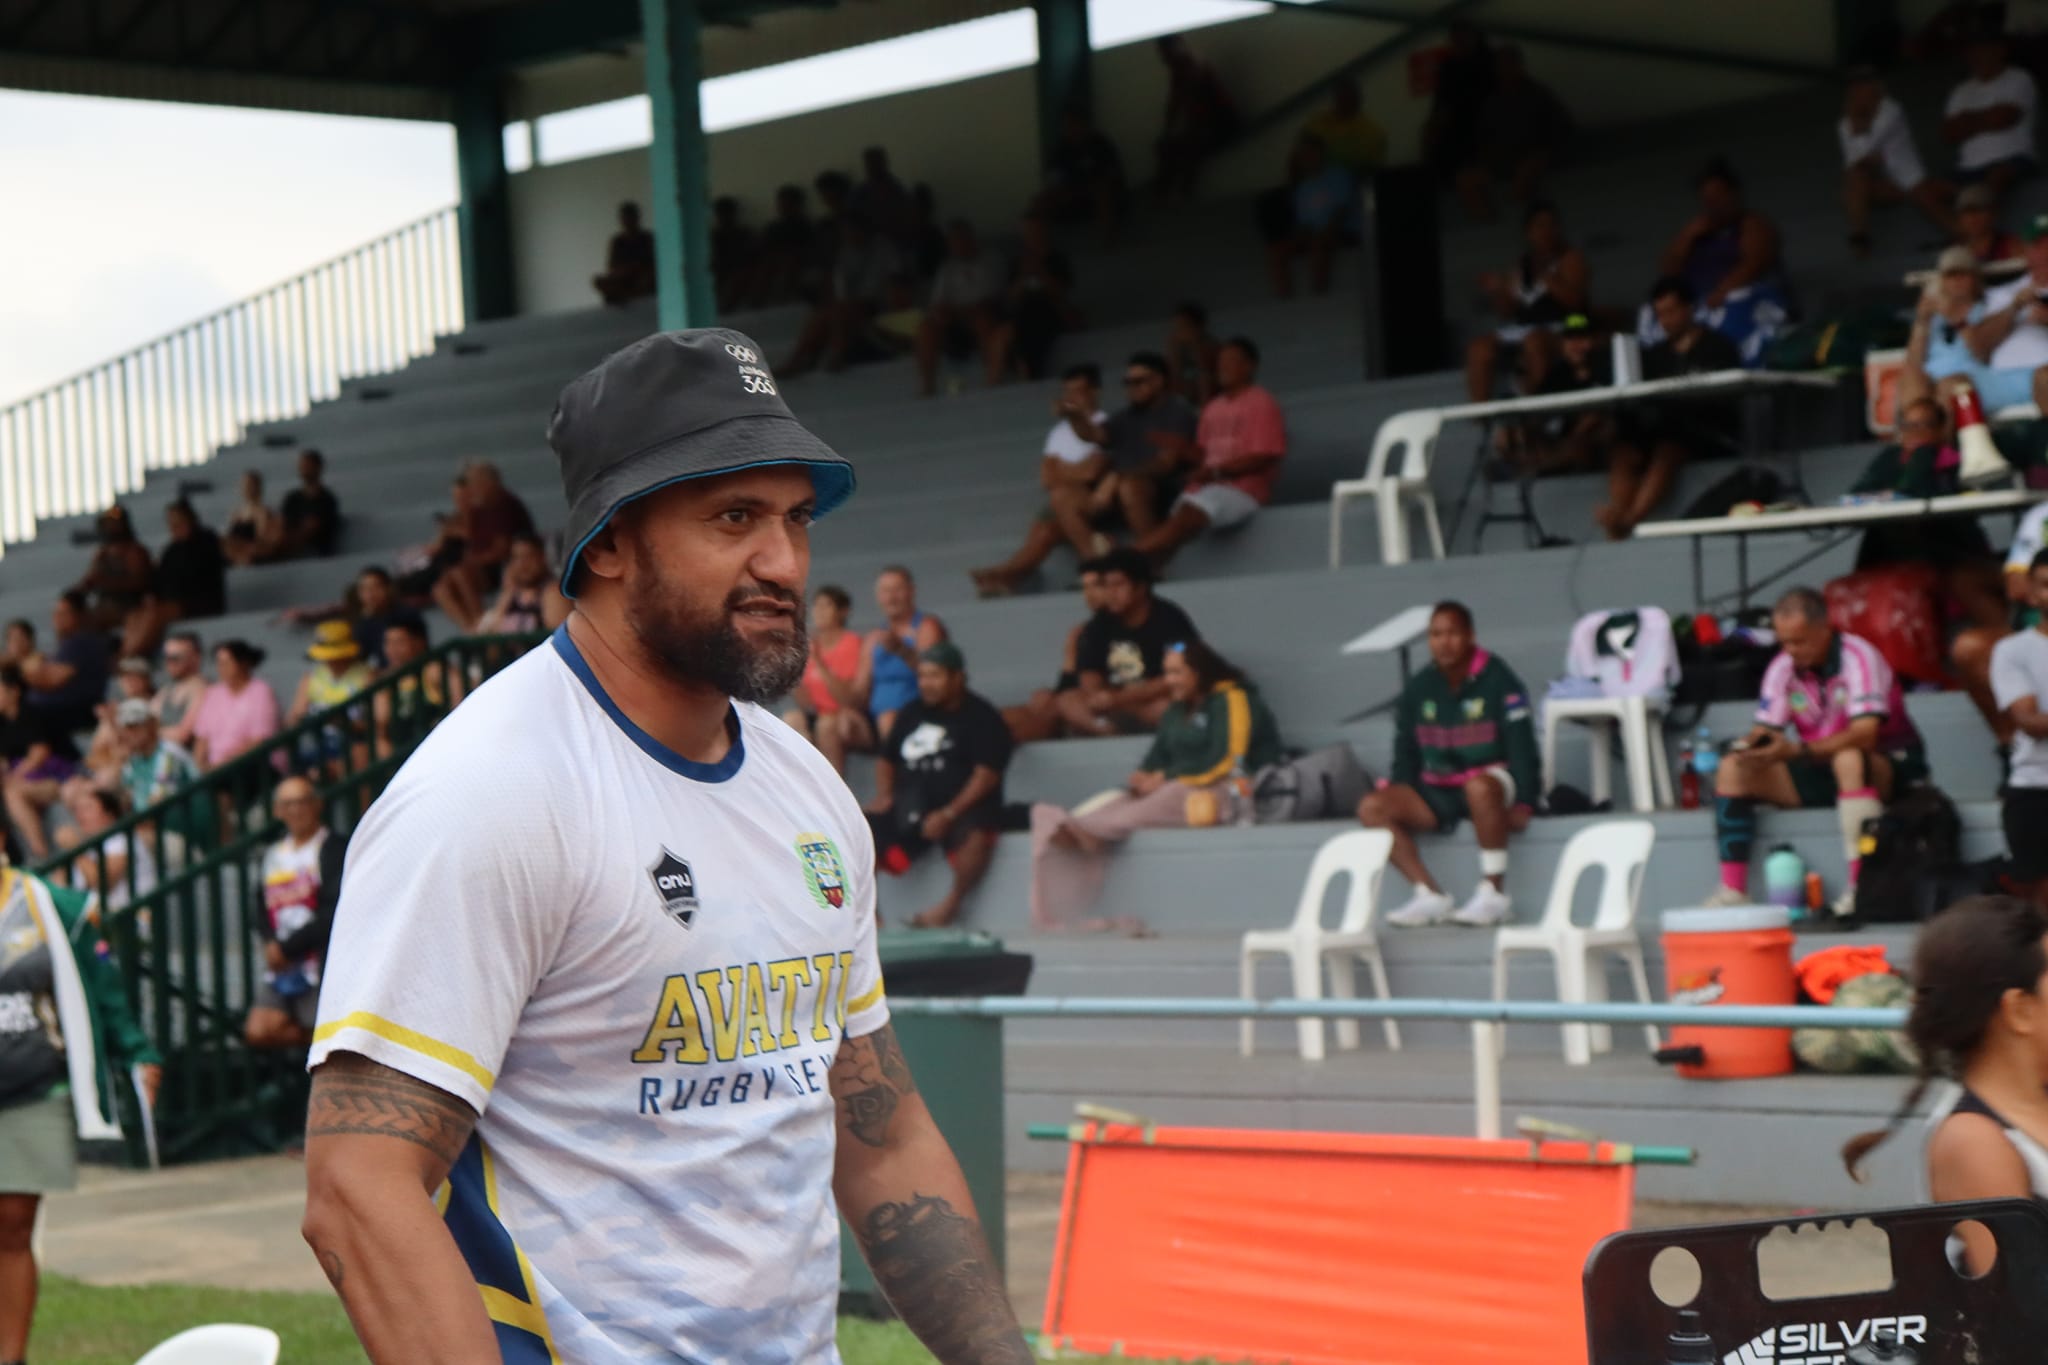 From setbacks to glory: Eels coach Nicholas shares story of resilience